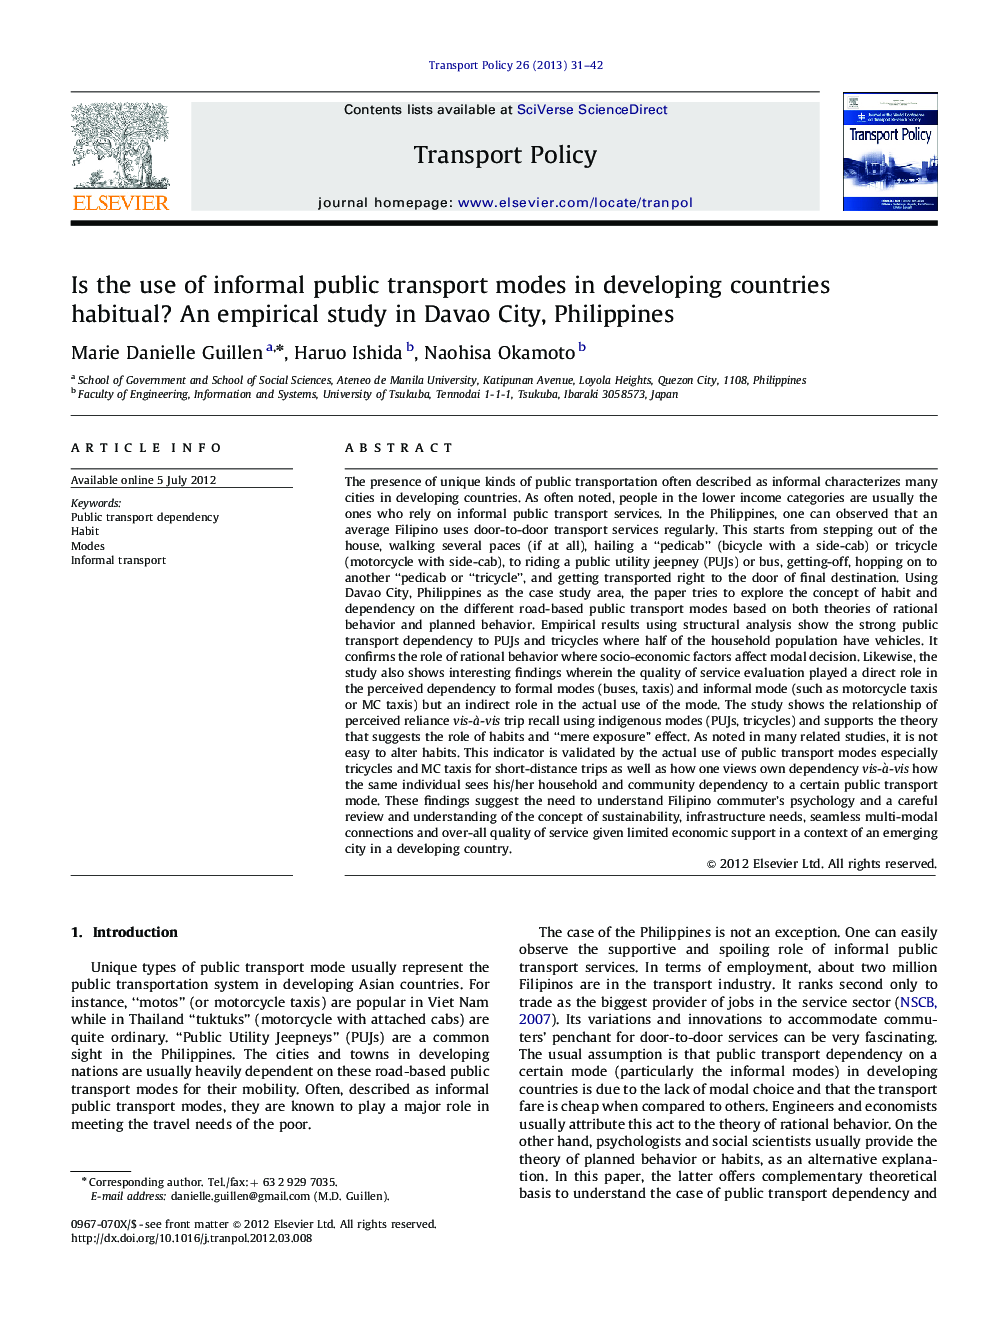 Is the use of informal public transport modes in developing countries habitual? An empirical study in Davao City, Philippines